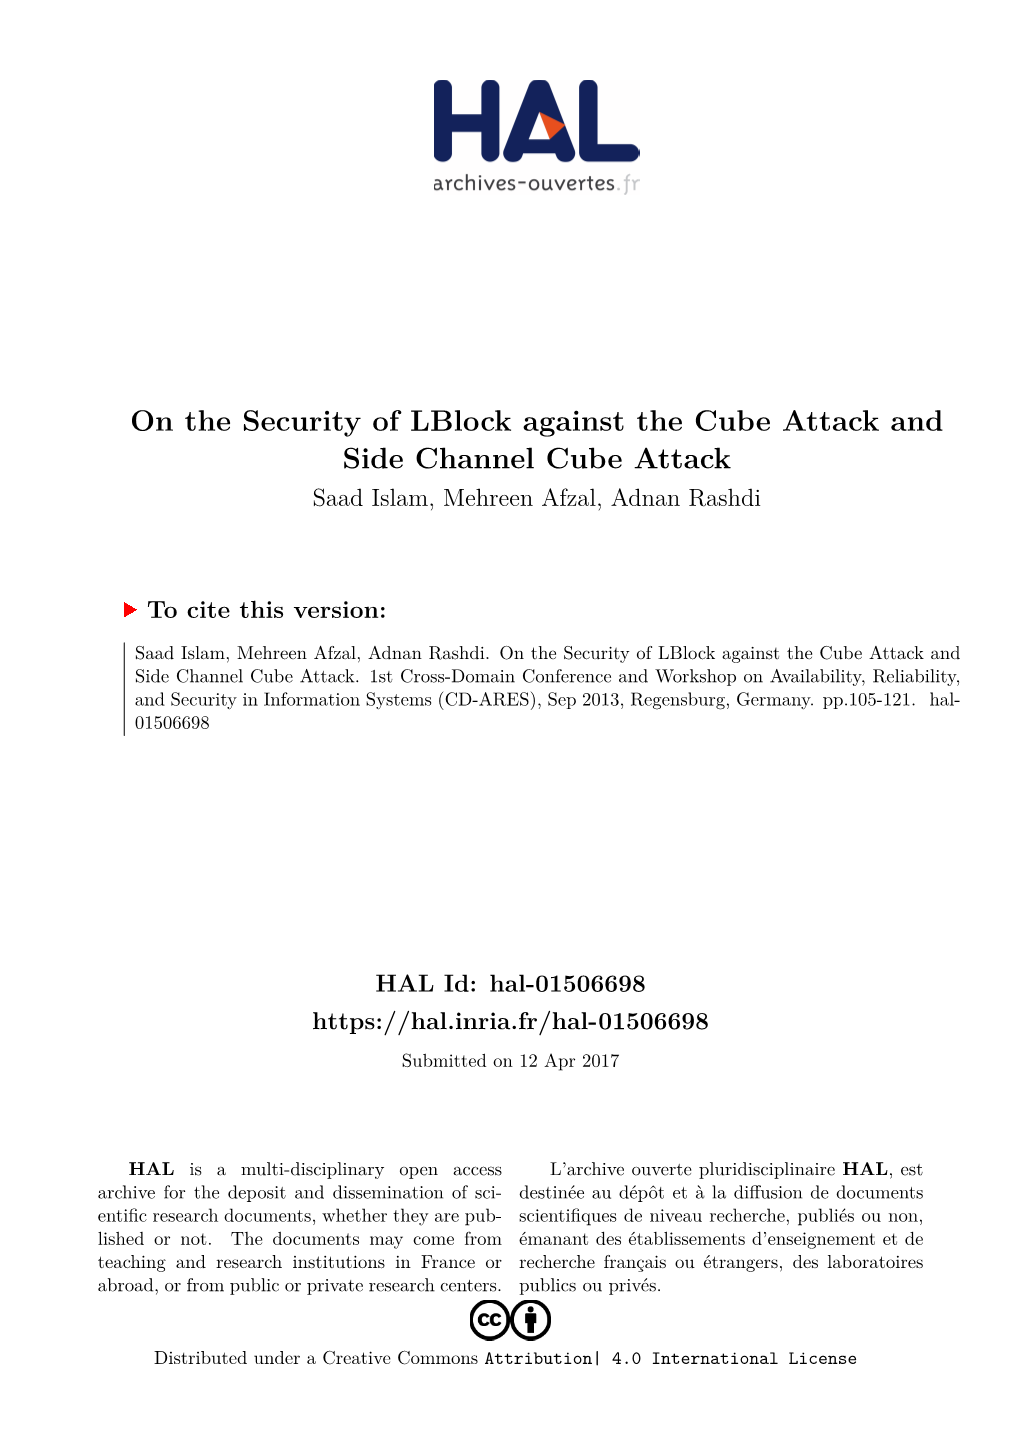 On the Security of Lblock Against the Cube Attack and Side Channel Cube Attack Saad Islam, Mehreen Afzal, Adnan Rashdi